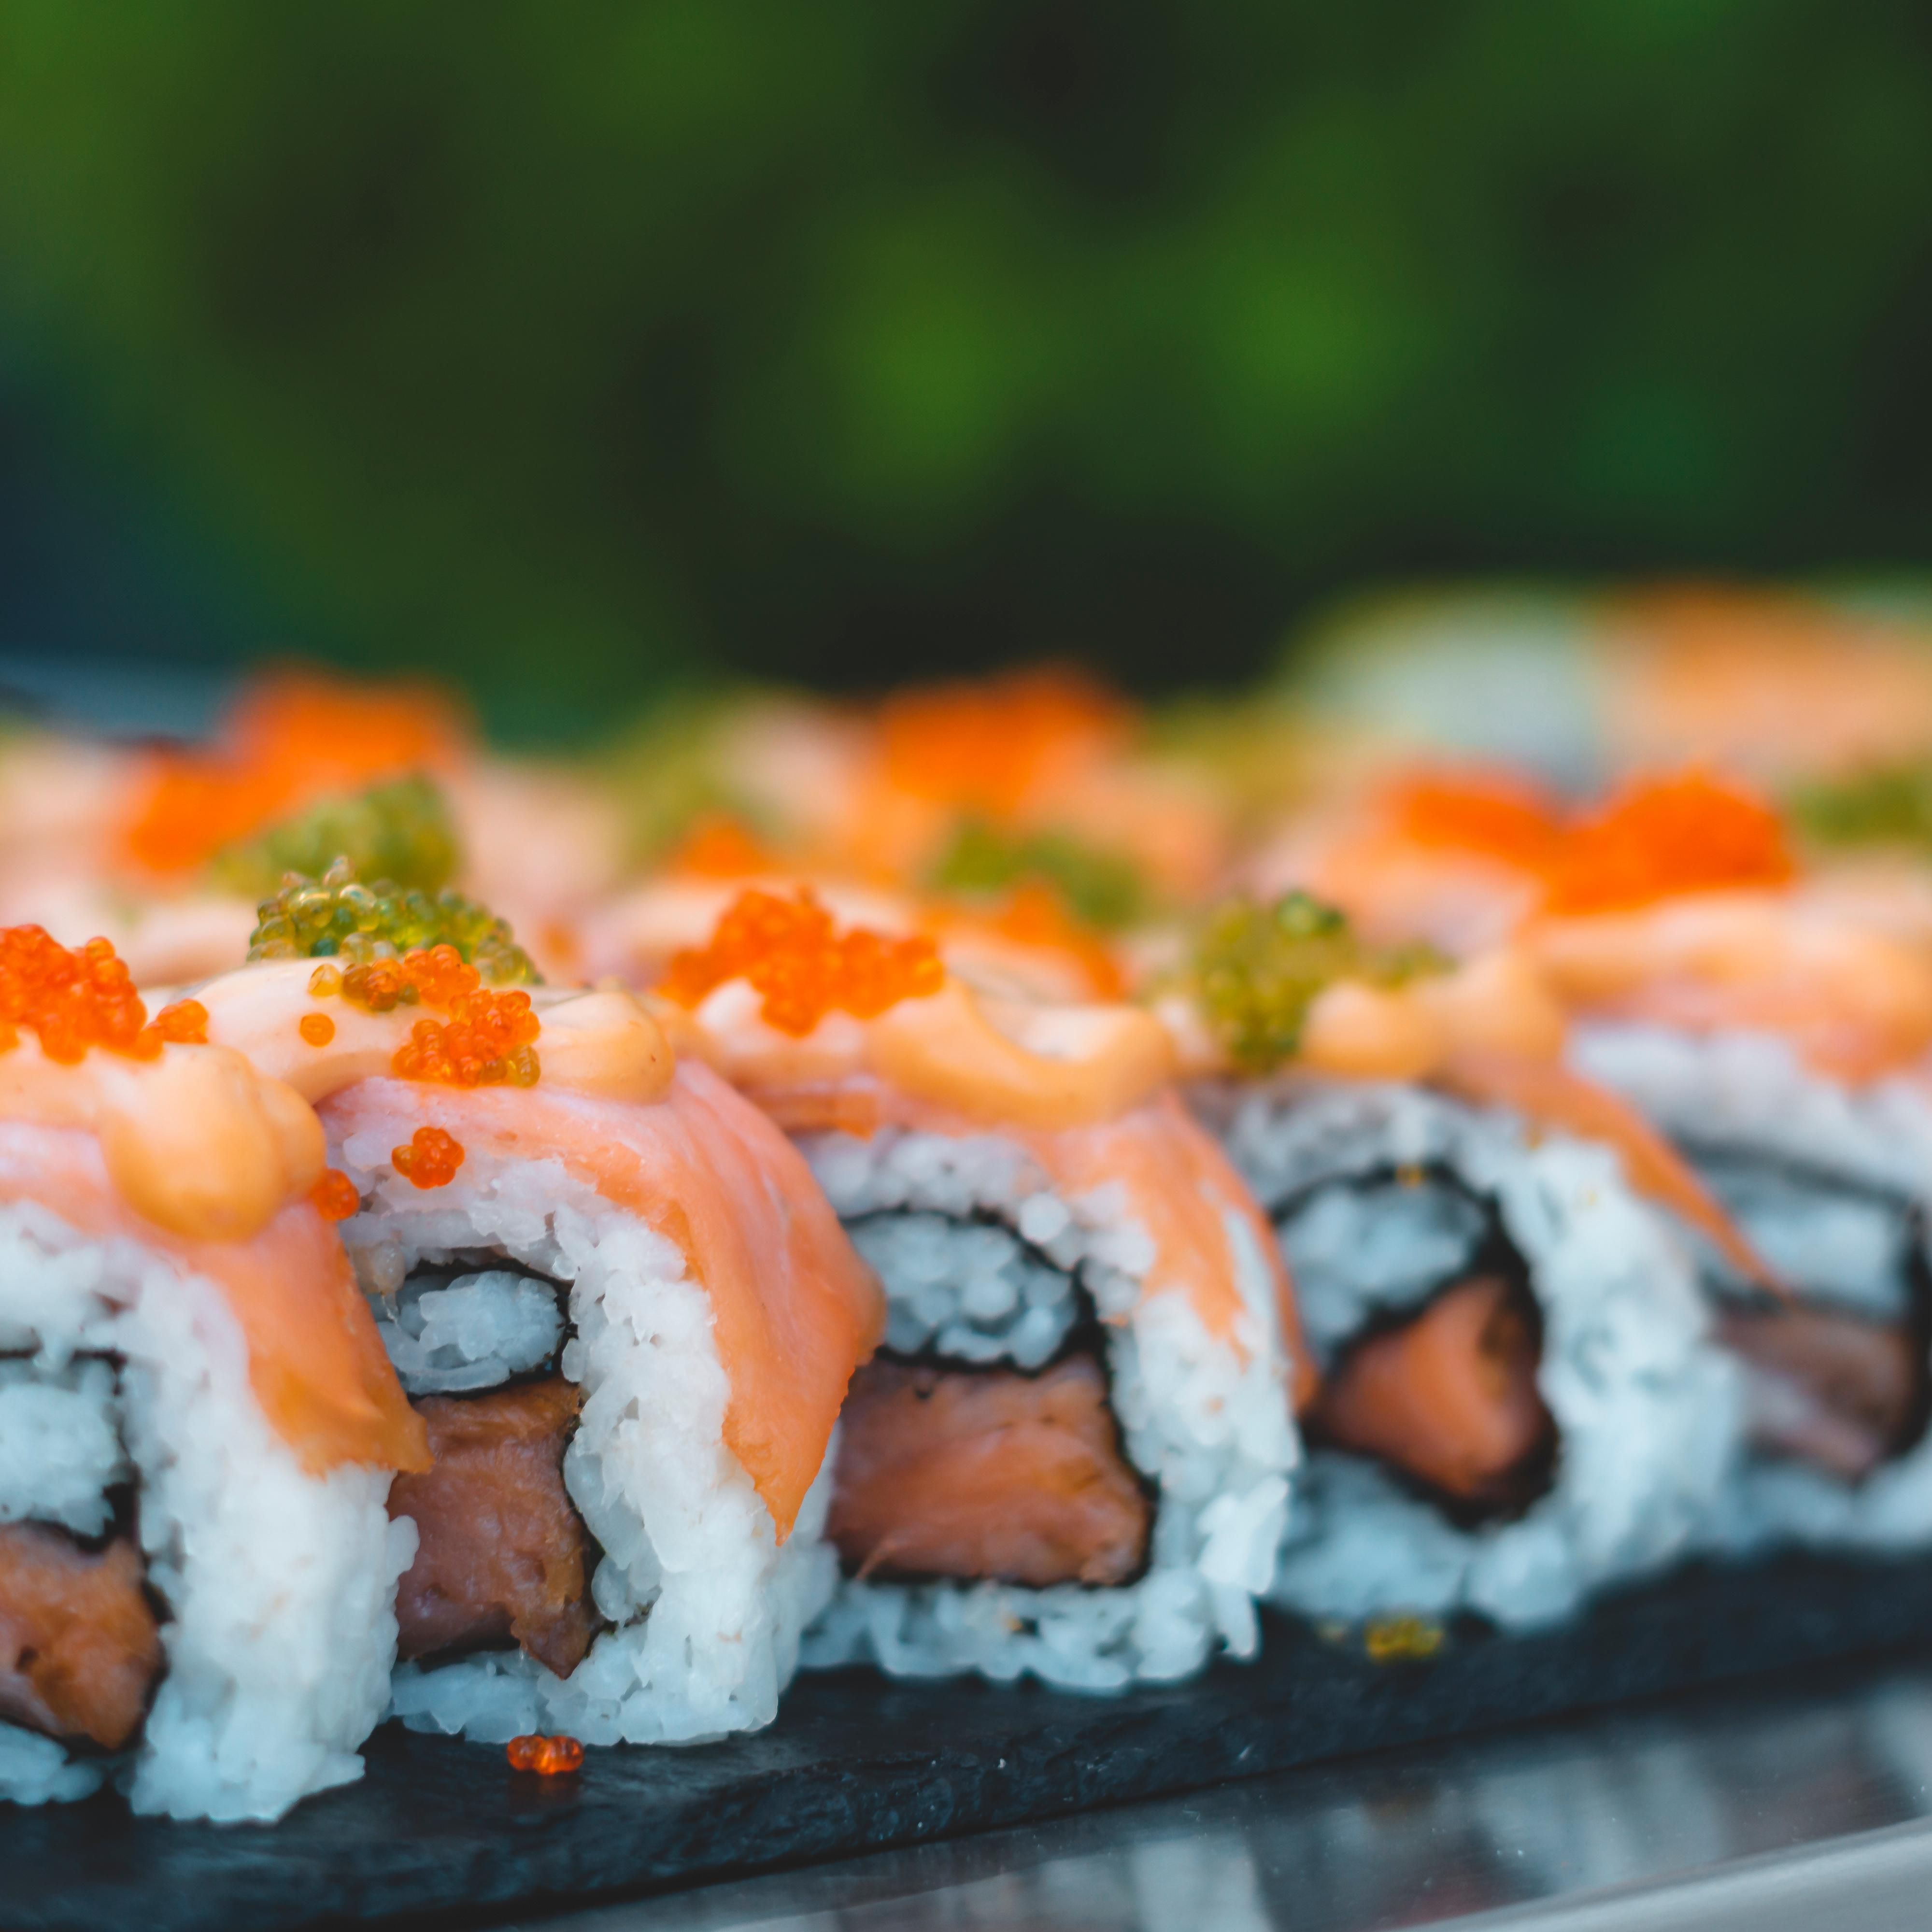 Try our delicious sushi from our Friday brunch.